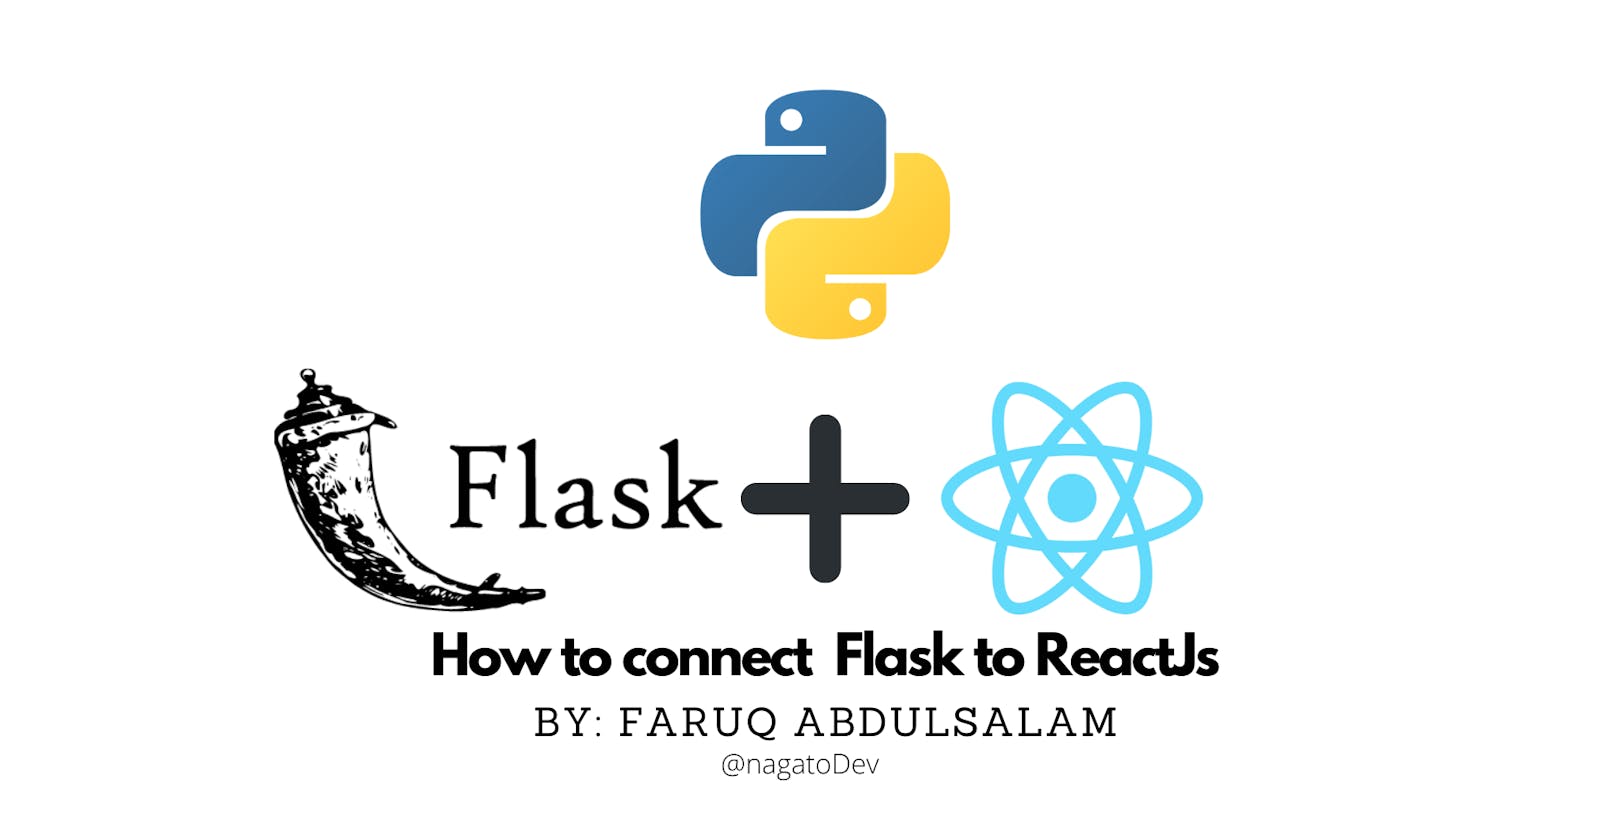 How to connect Flask to ReactJs